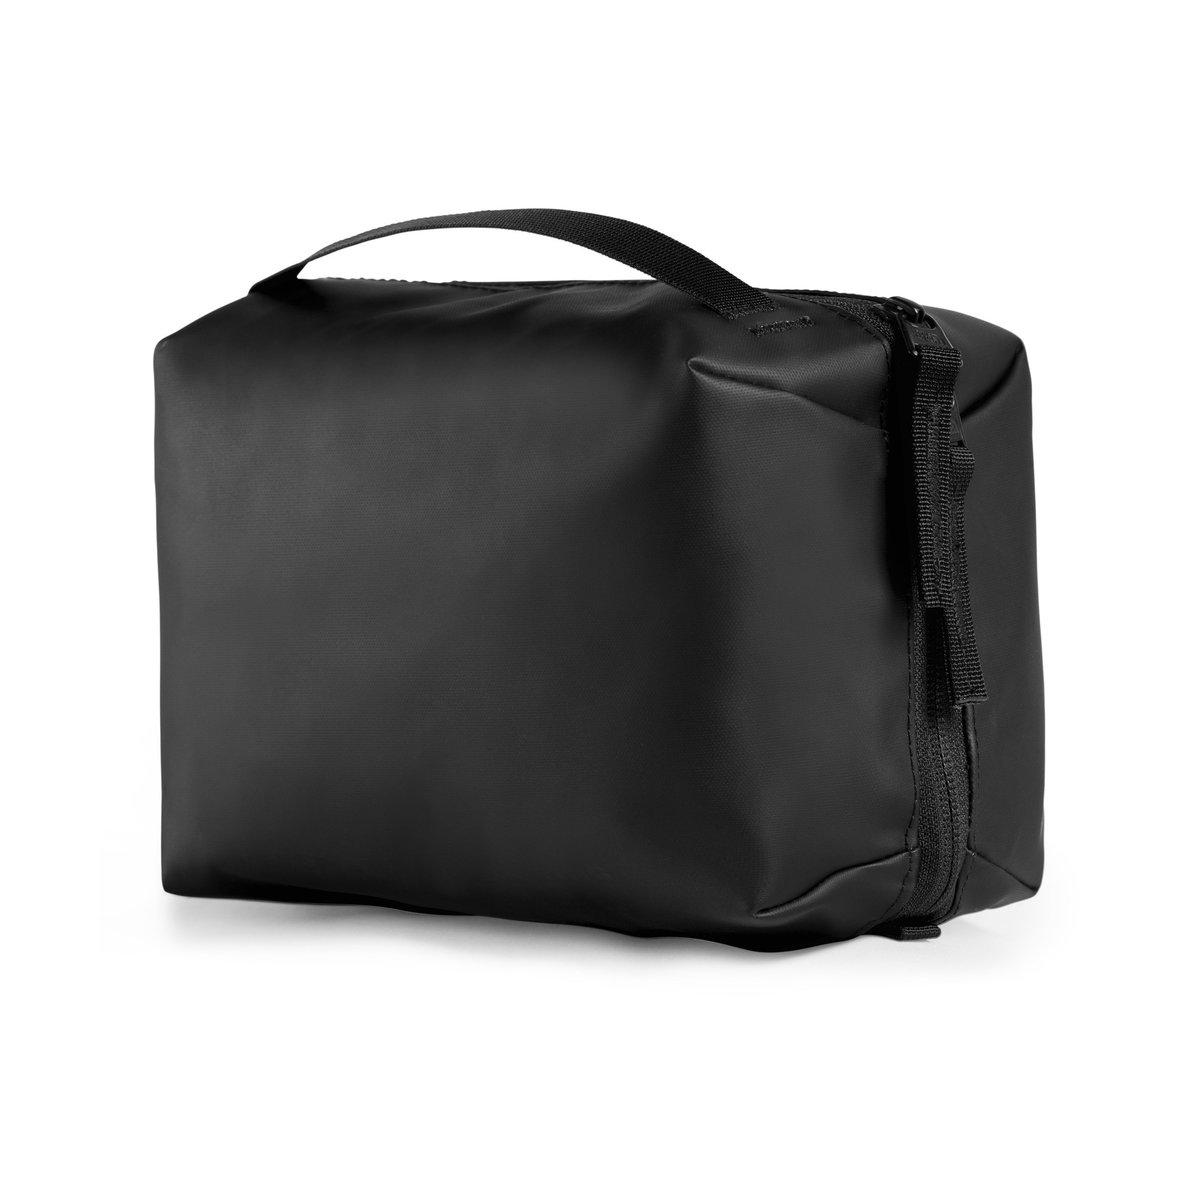 north face stratoliner toiletry kit